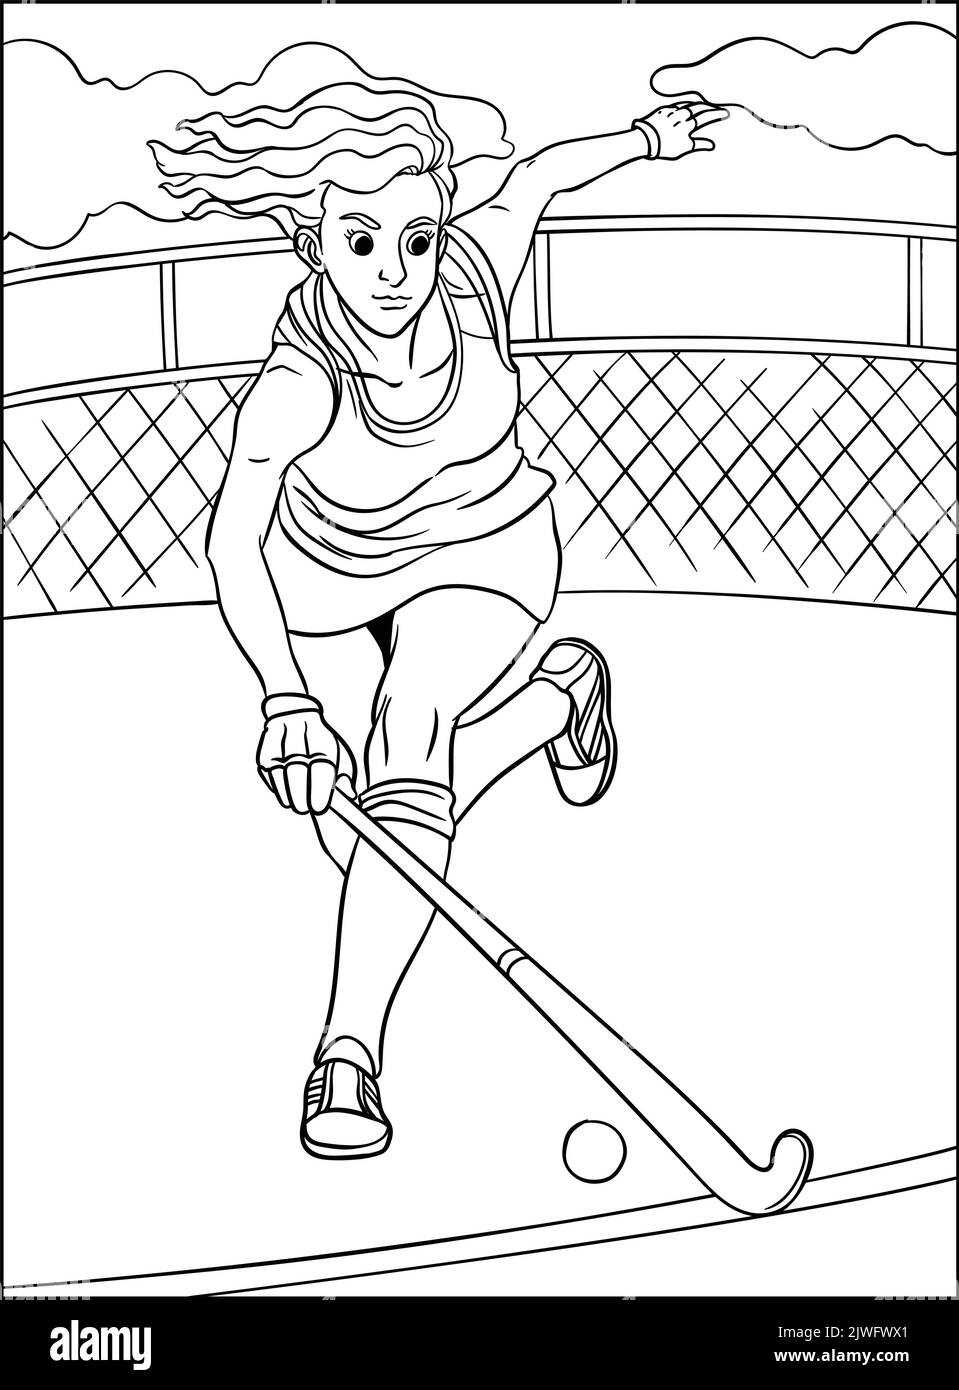 Field Hockey Coloring Page for Kids Stock Vector